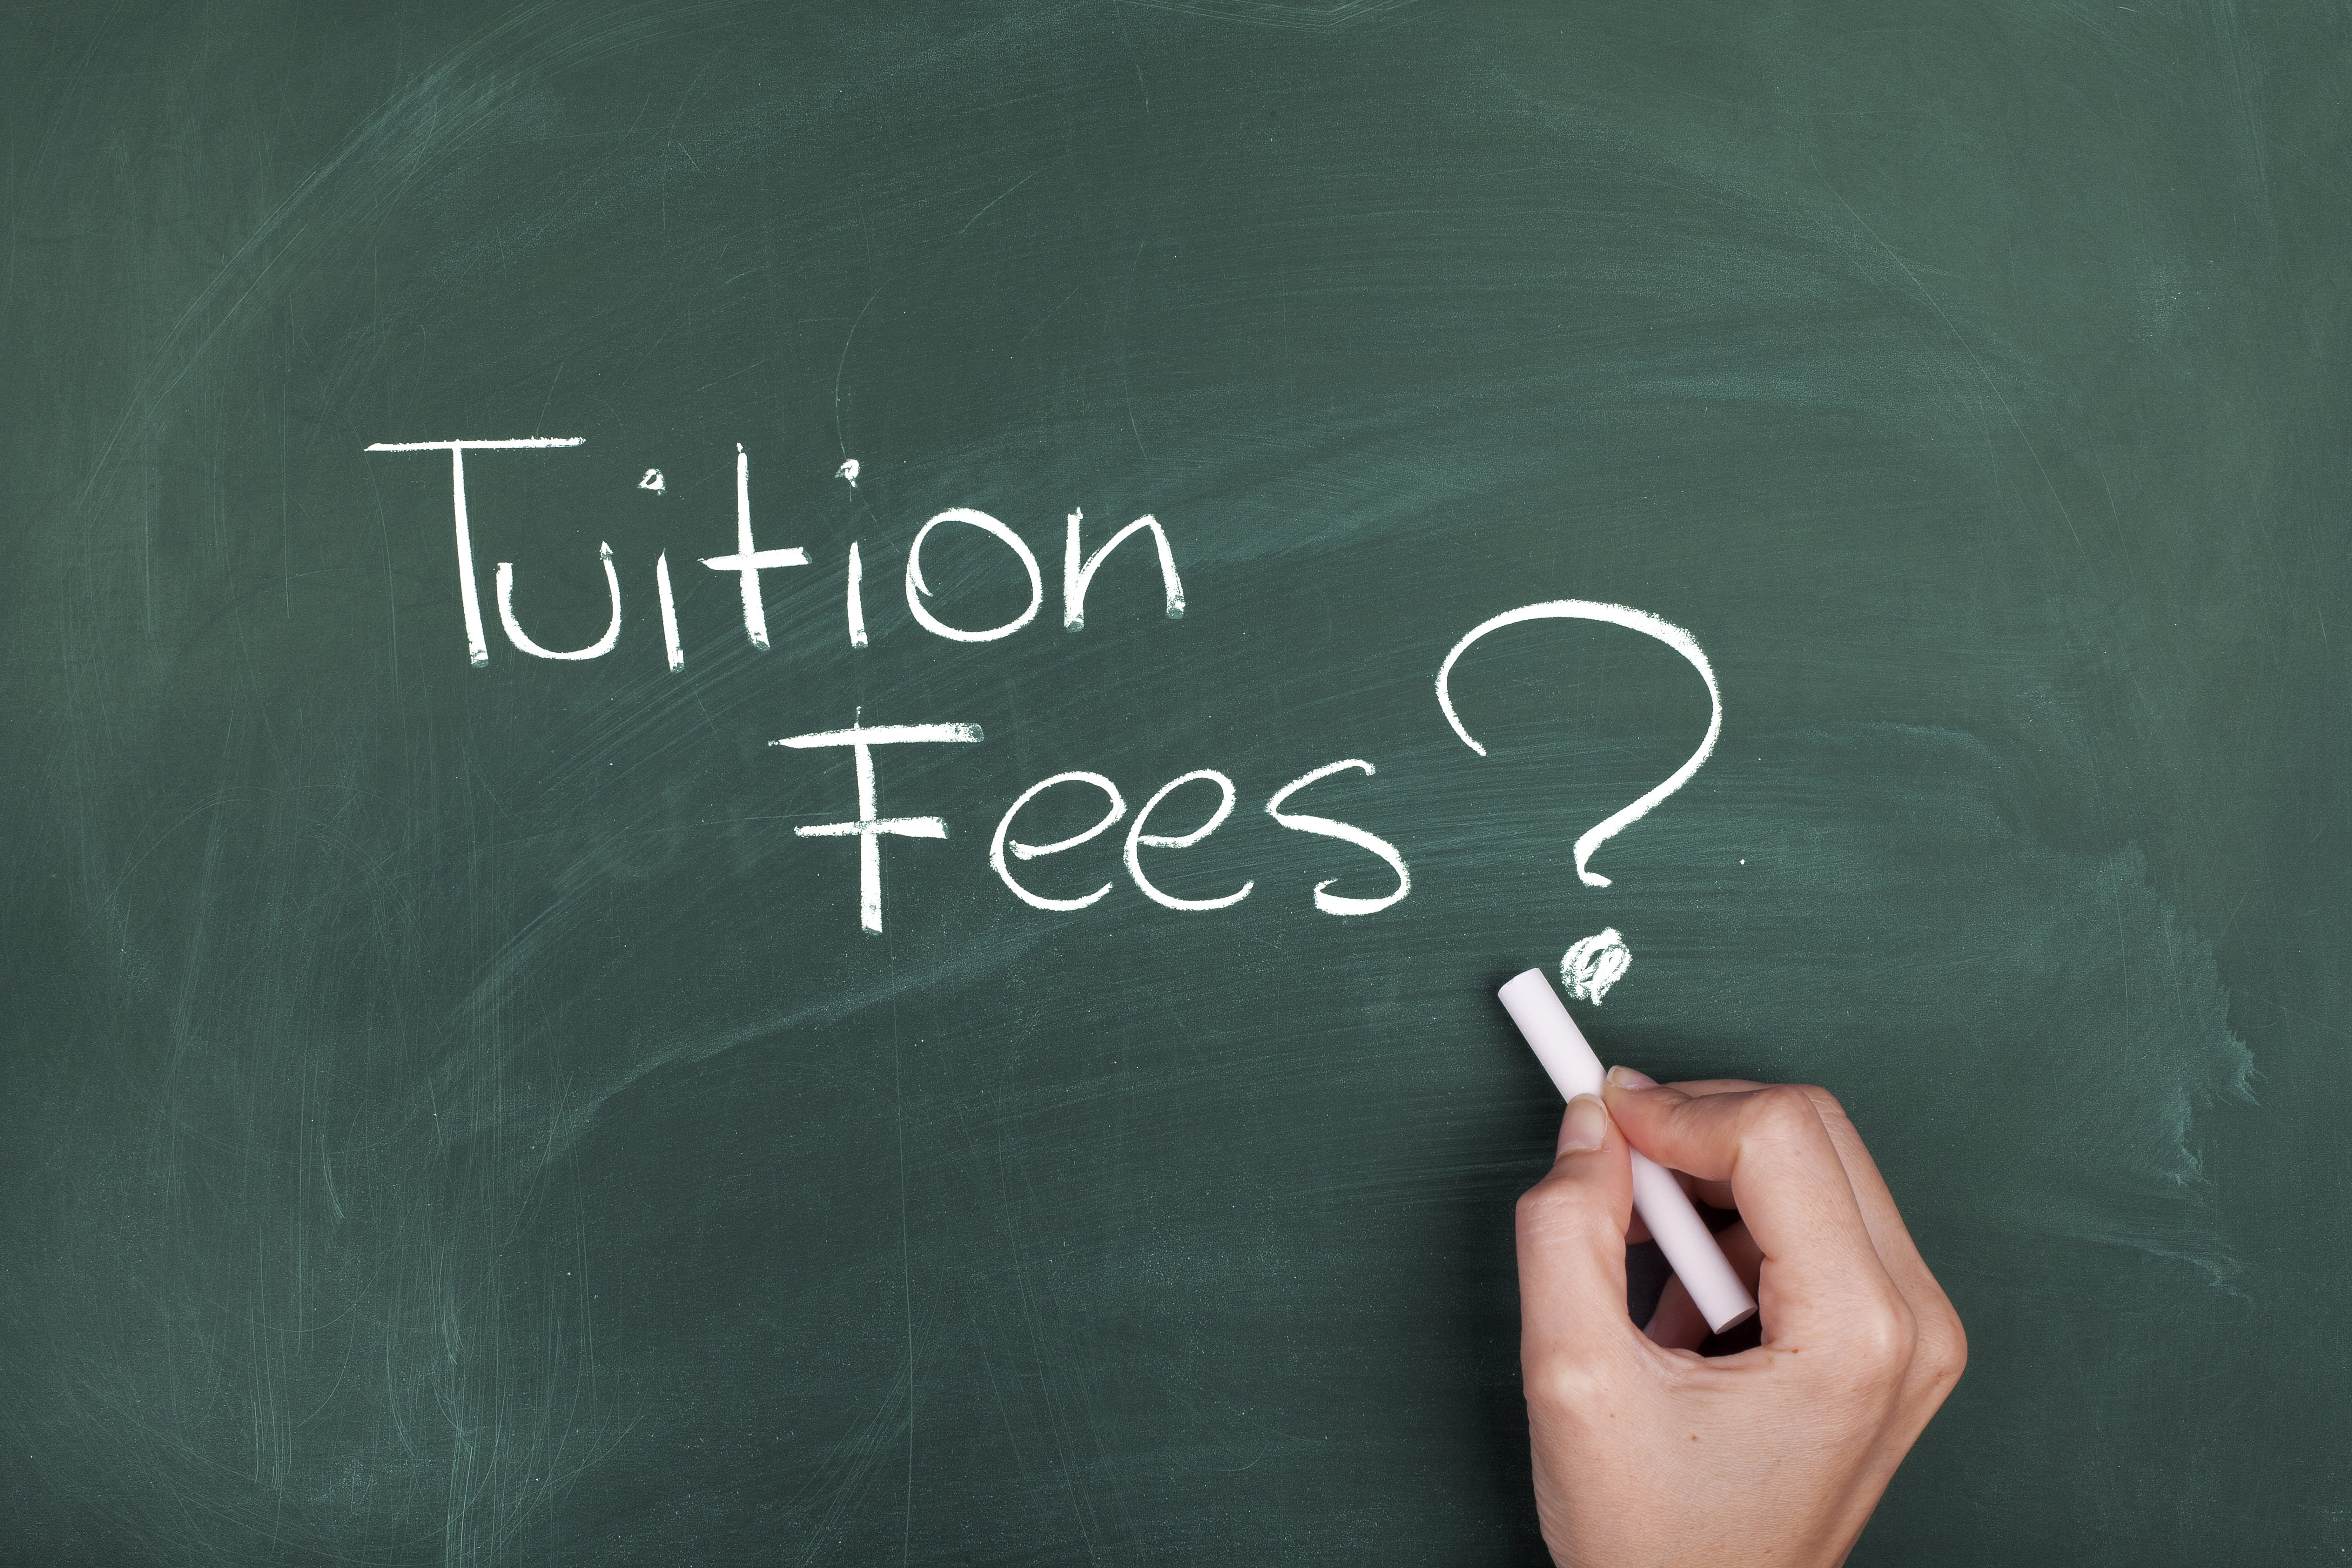 Tuition and Fees written on a chalkboard